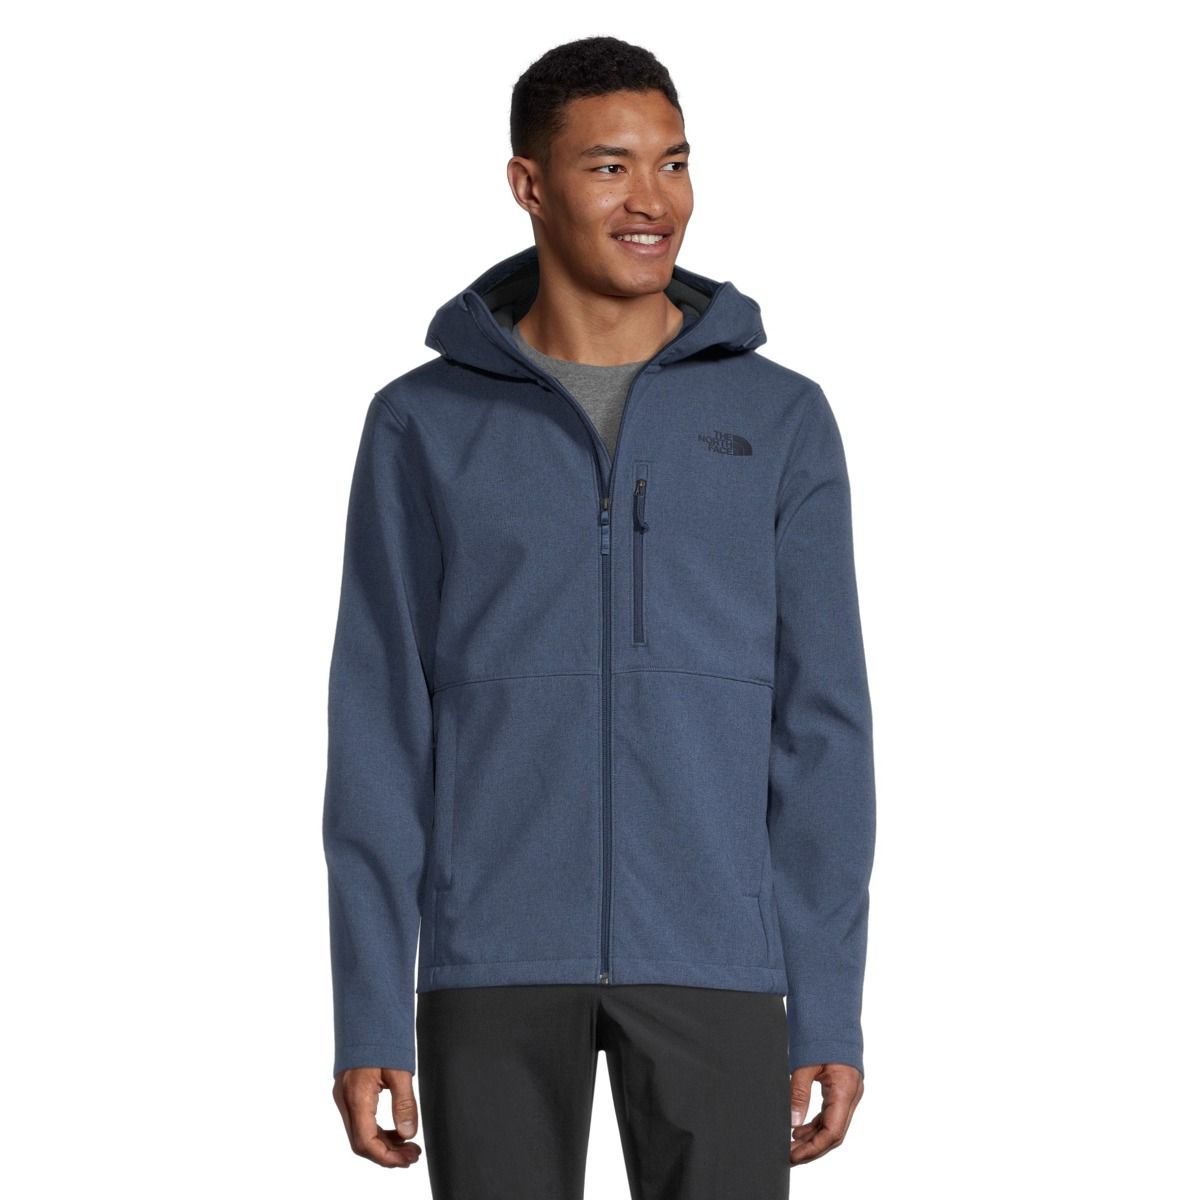 Image of The North Face Men's Apex Bionic 2 Hoodie